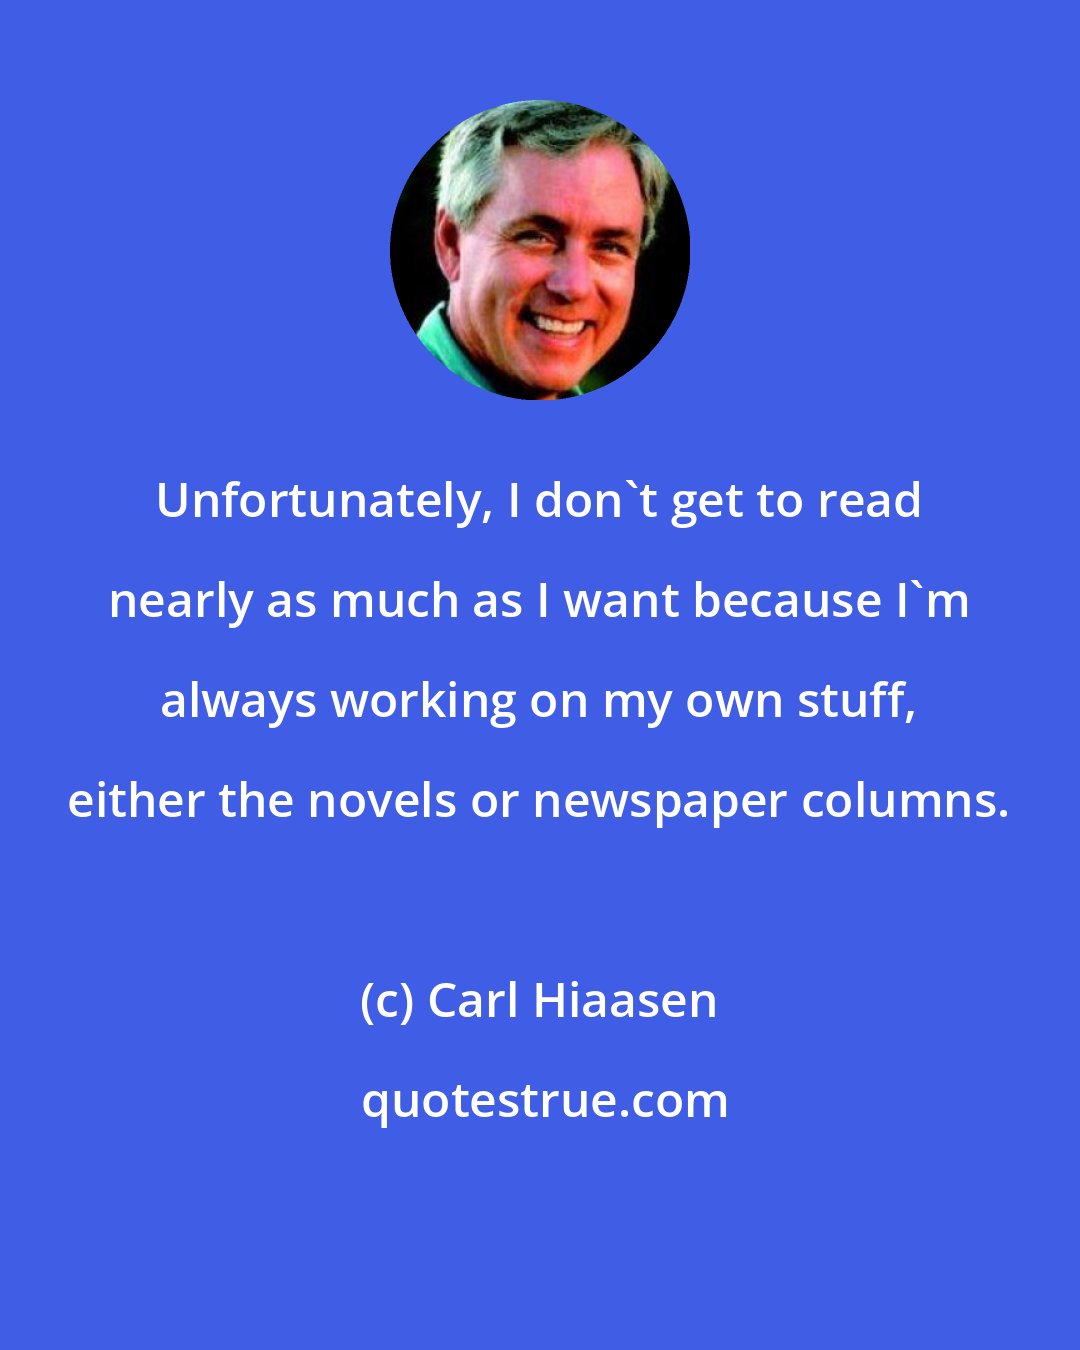 Carl Hiaasen: Unfortunately, I don't get to read nearly as much as I want because I'm always working on my own stuff, either the novels or newspaper columns.